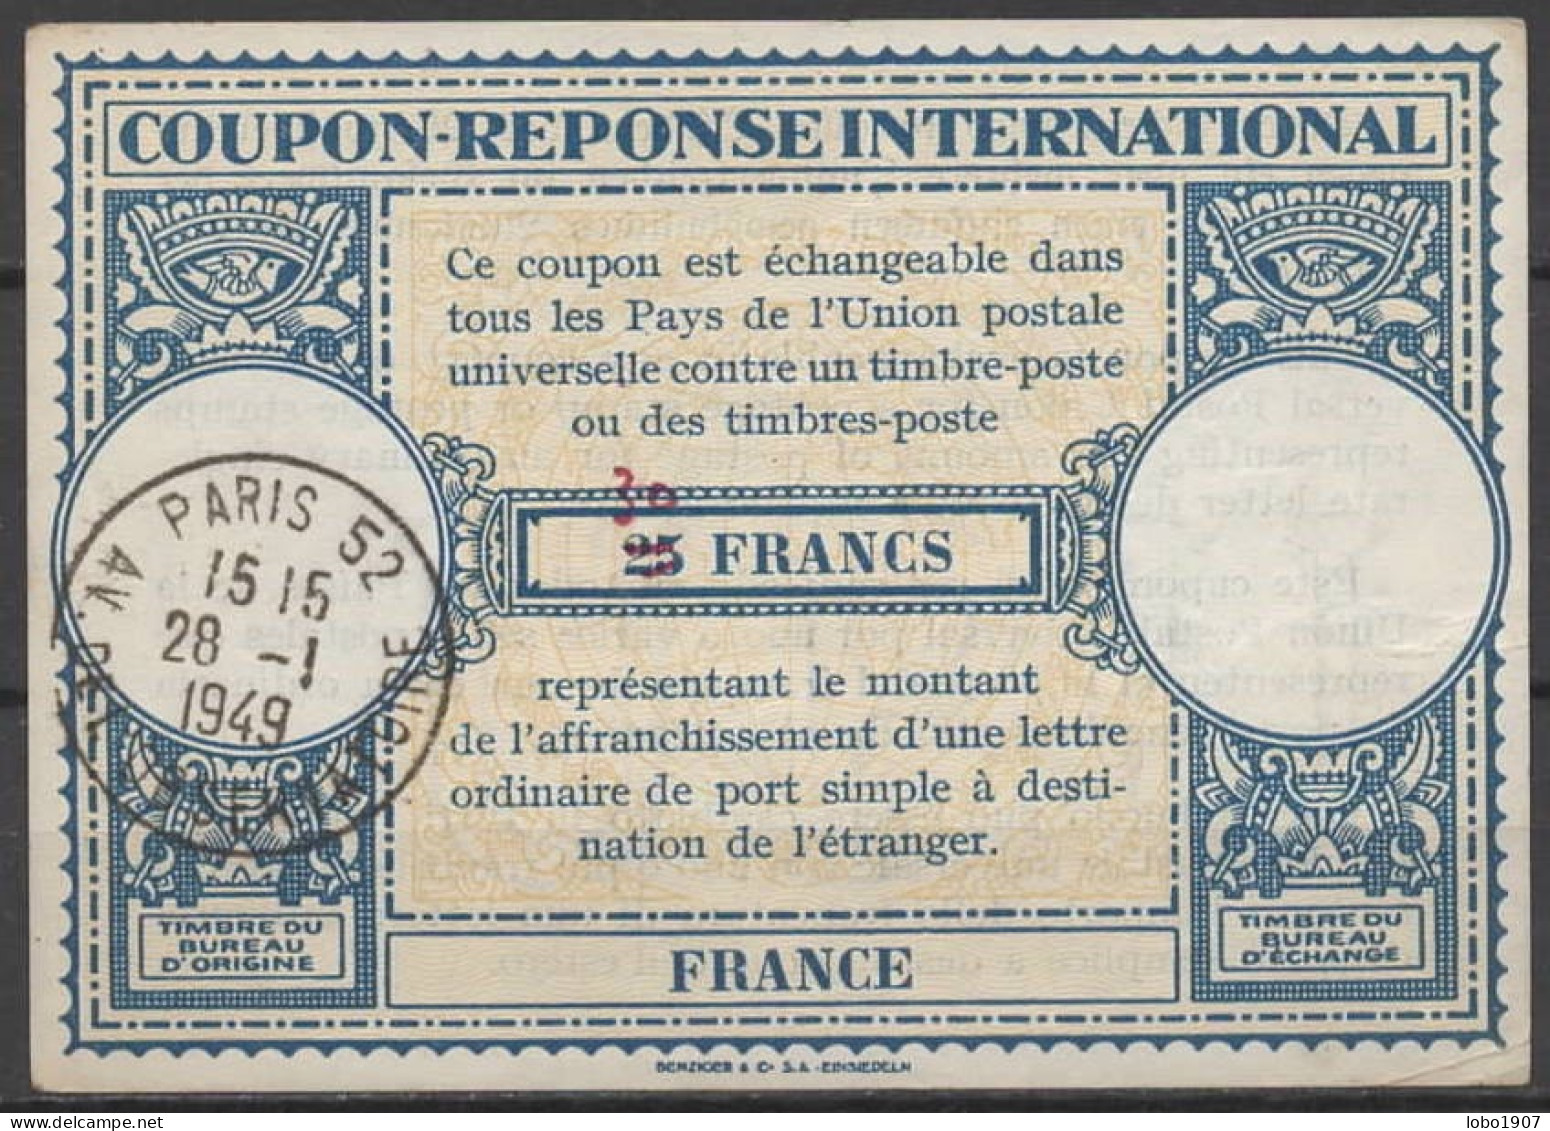 FRANCE  Lo14o  30 / 25 FRANCS  International Reply Coupon Reponse Antwortschein IRC IAS O PARIS 52 AV. DE L'OBSERVATOIRE - Reply Coupons